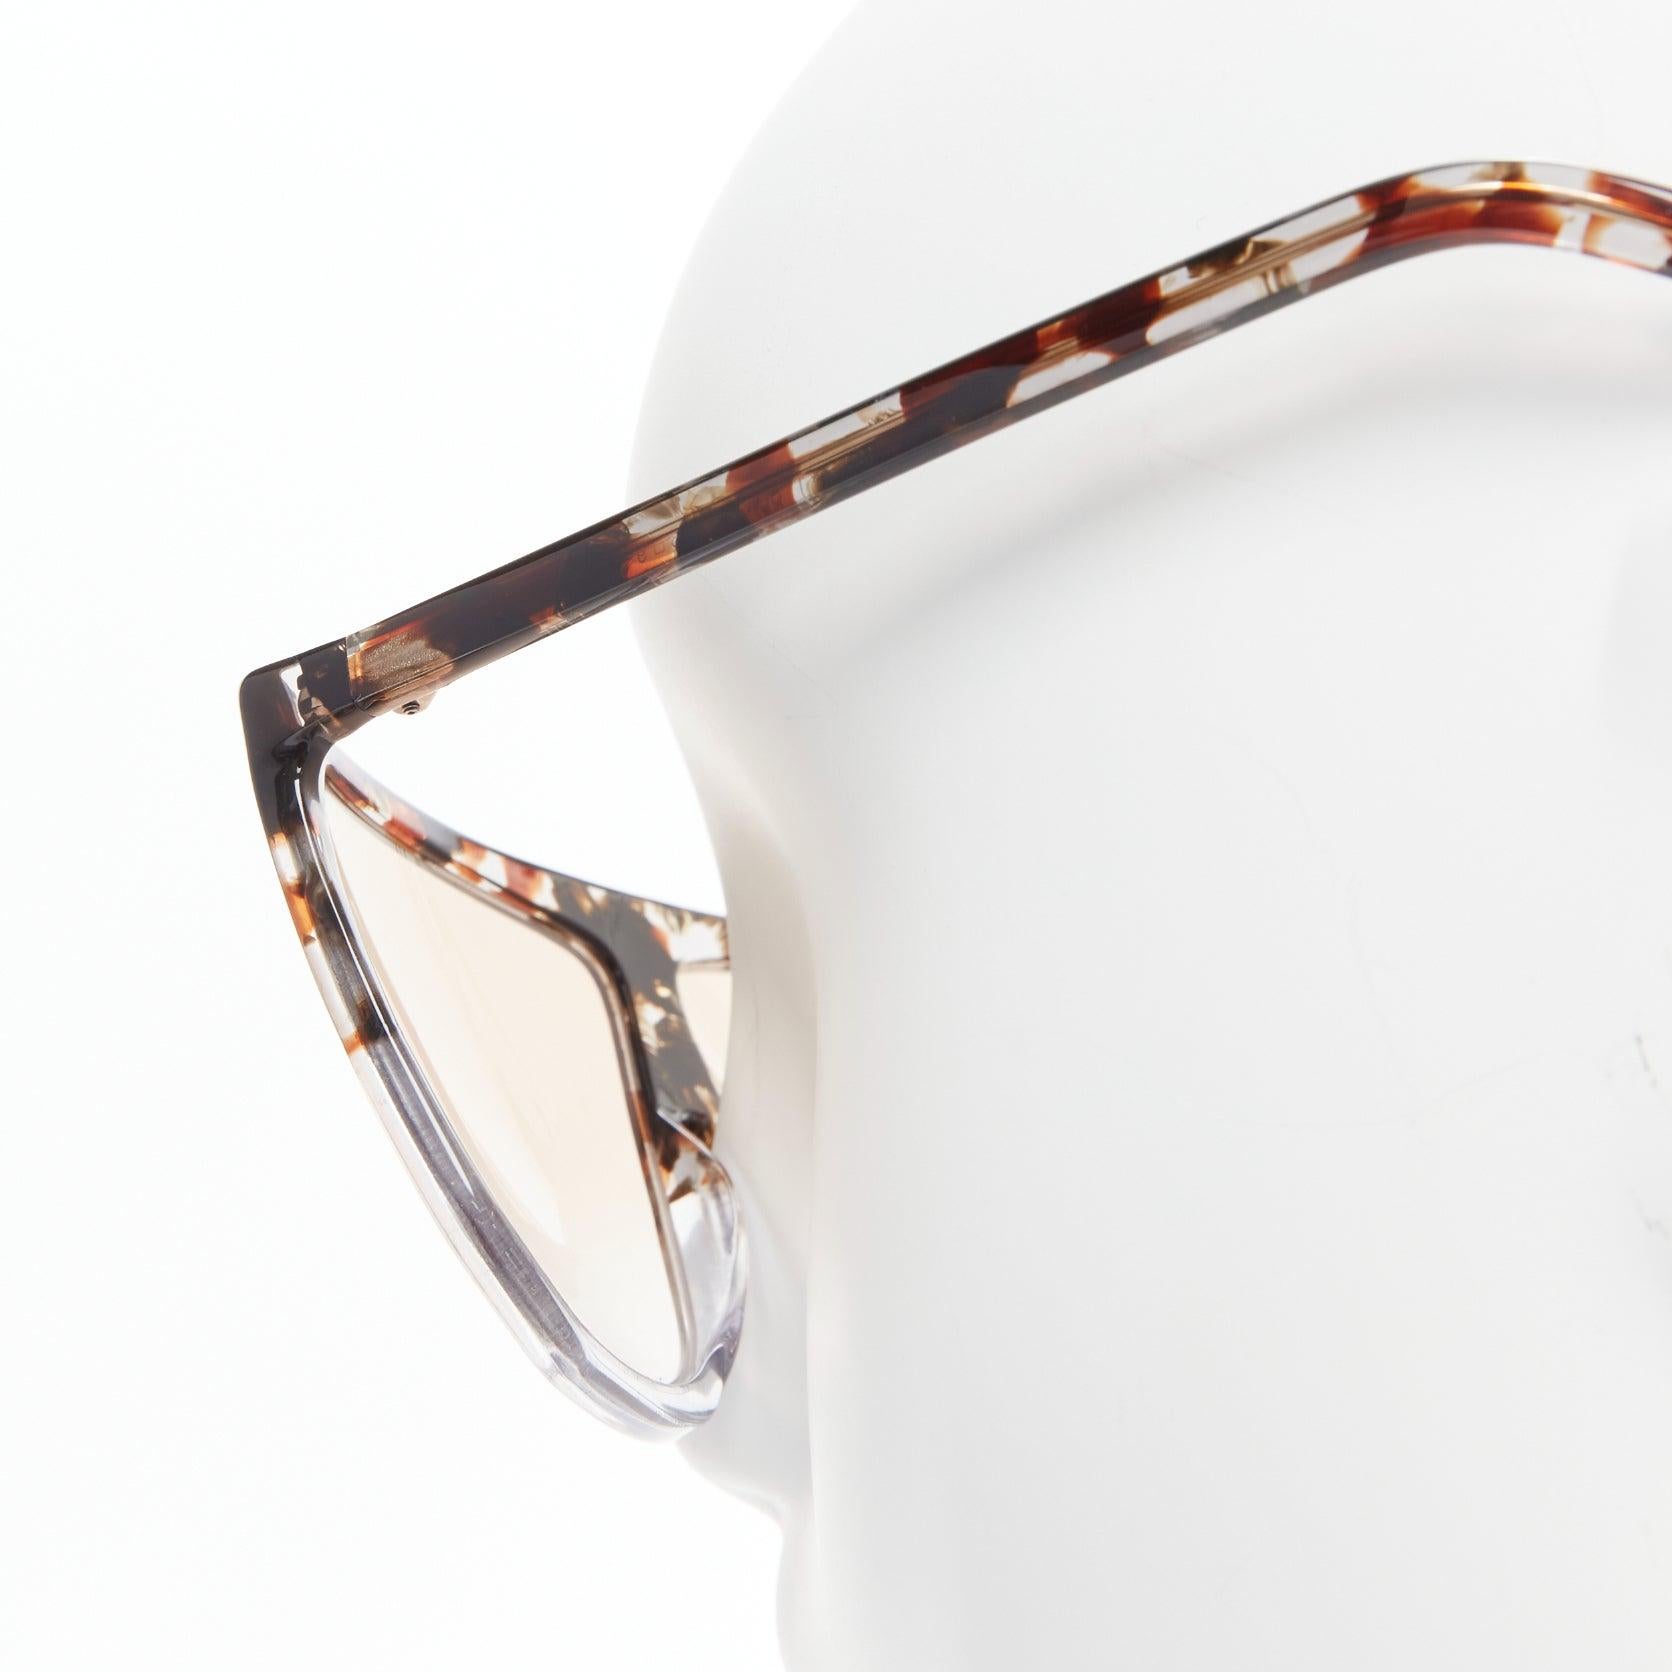 LOEWE SLW943 Filippa brown grey ombre gradient square oversized sunglasses
Reference: BSHW/A00094
Brand: Loewe
Designer: JW Anderson
Model: SLW943
Material: Acetate
Color: Brown, Grey
Pattern: Abstract
Closure: Pull On
Lining: Brown Acetate
Extra